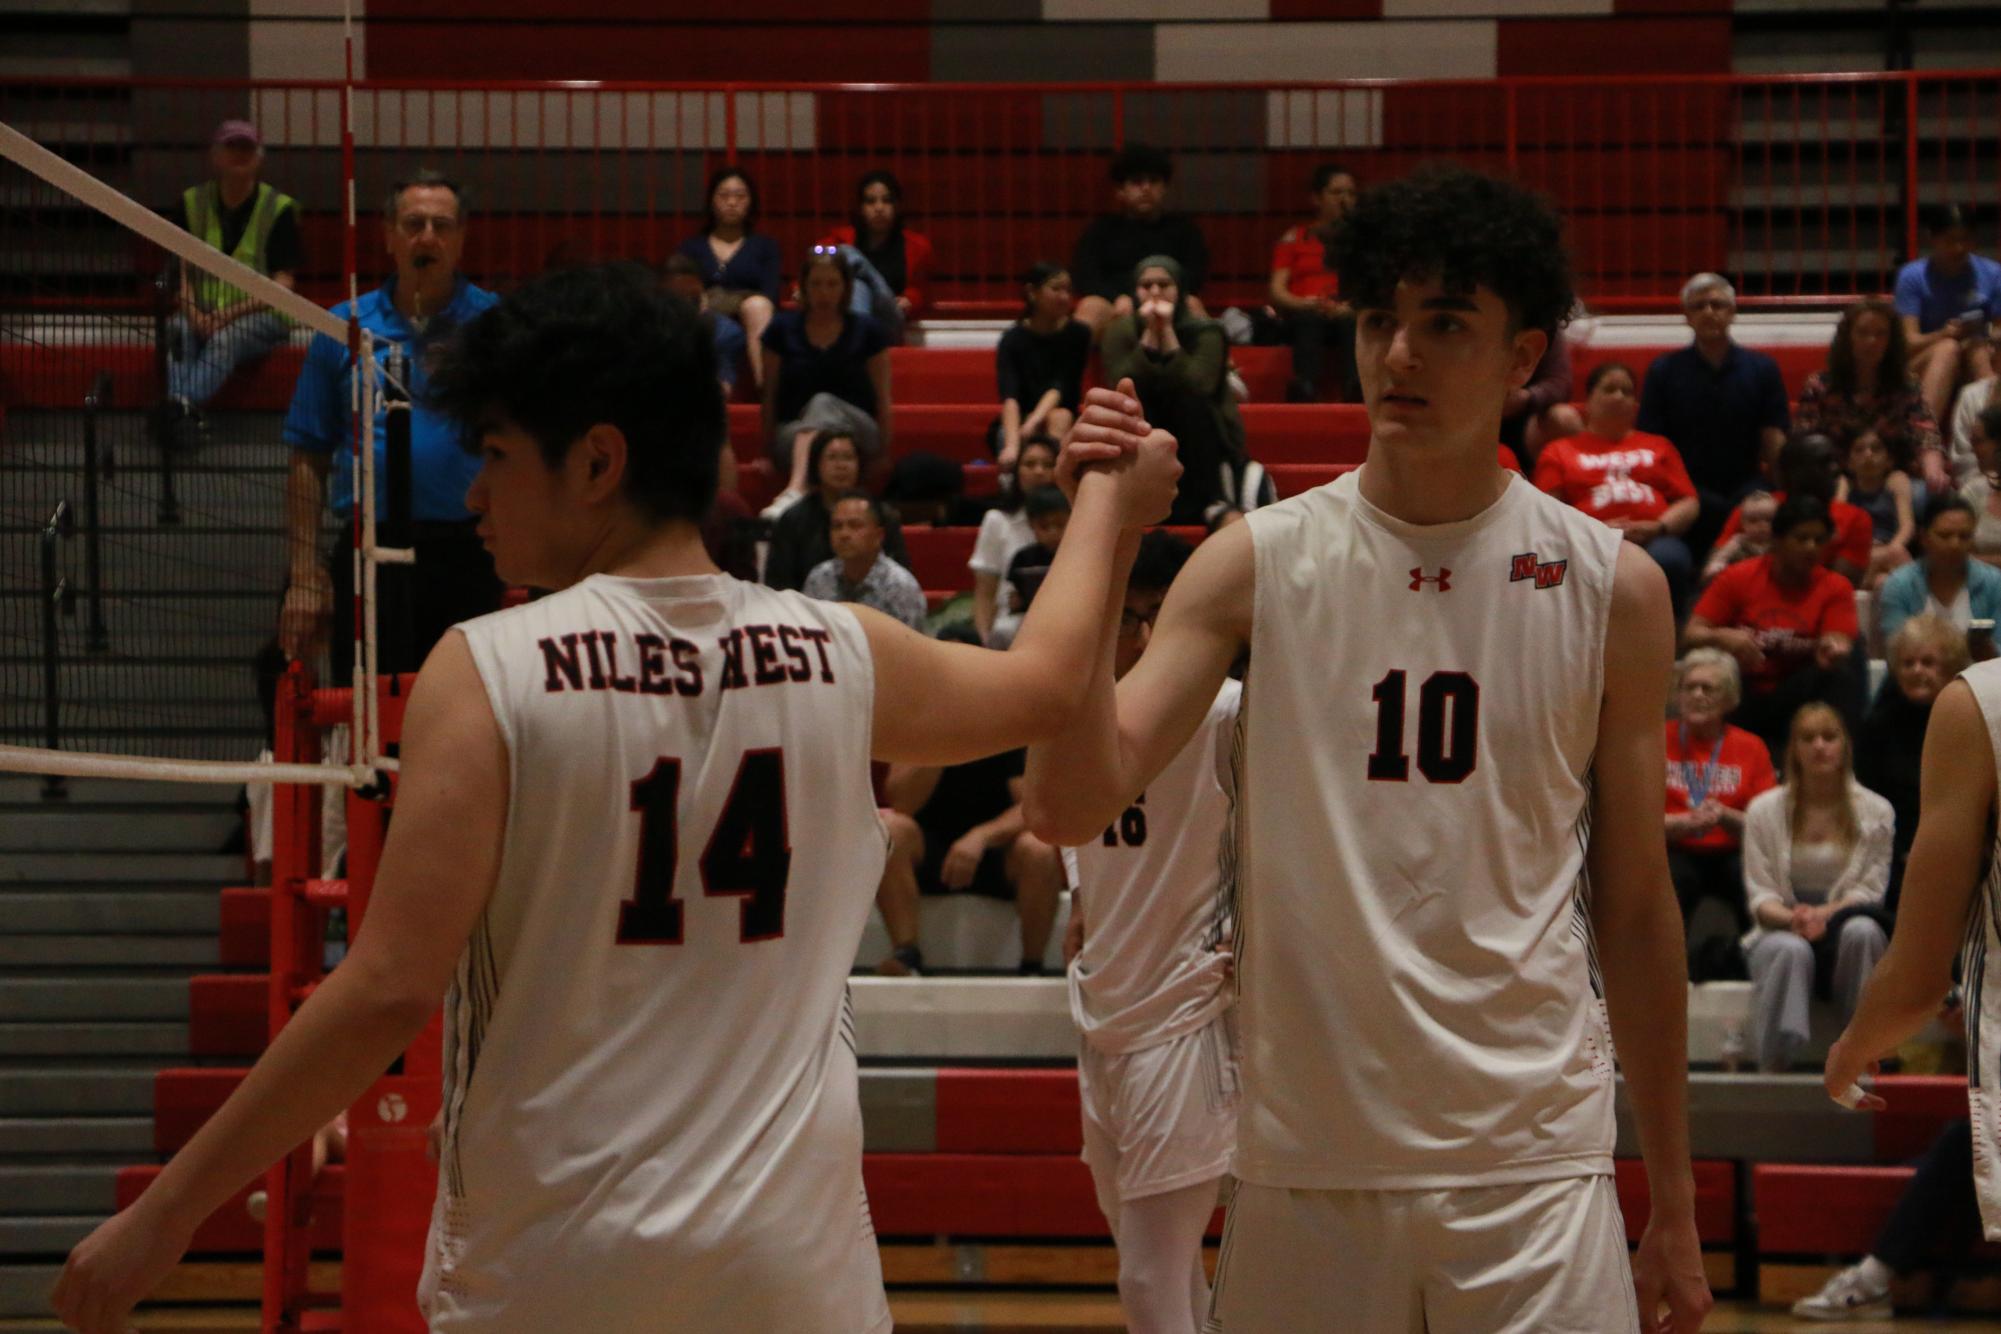 Intense Showdown as Niles West Boys Volleyball Take on Niles North Vikings in Rivalry Clash